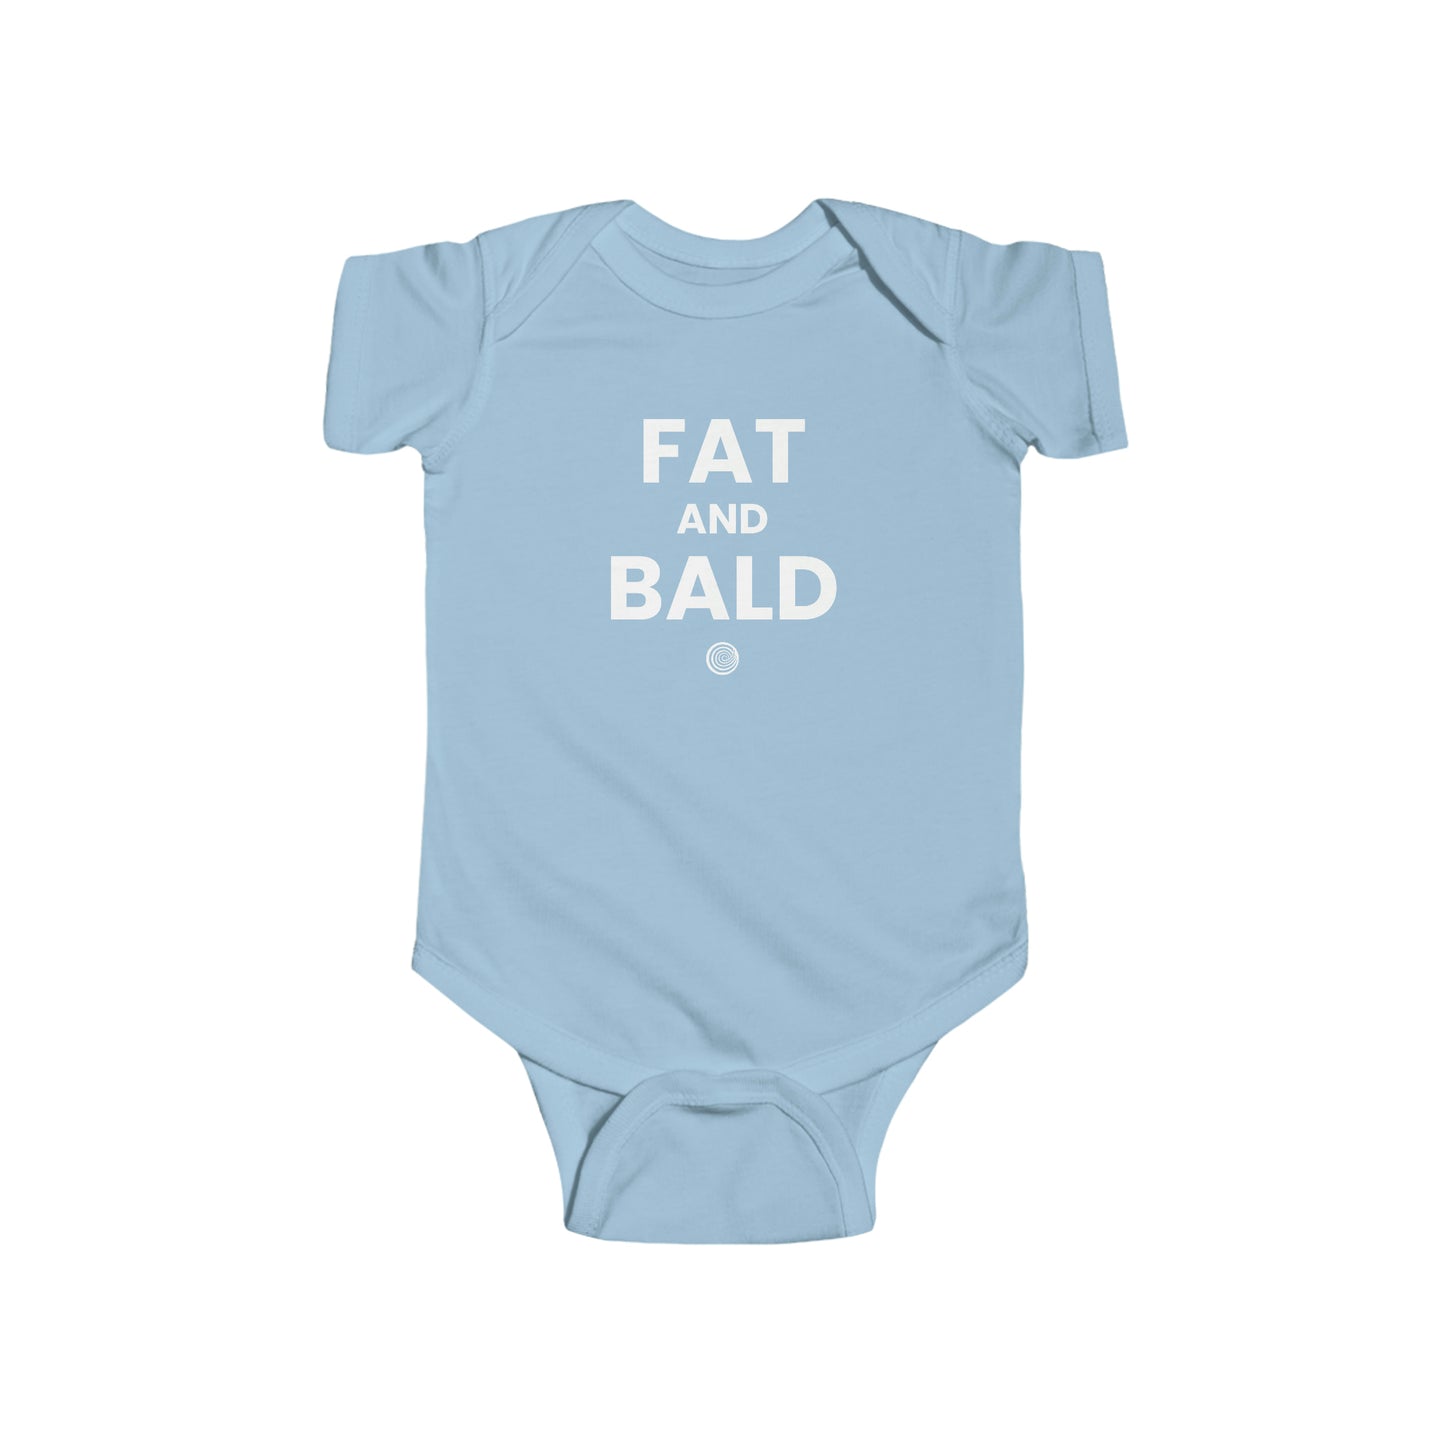 "Fat And Bald" Onesie